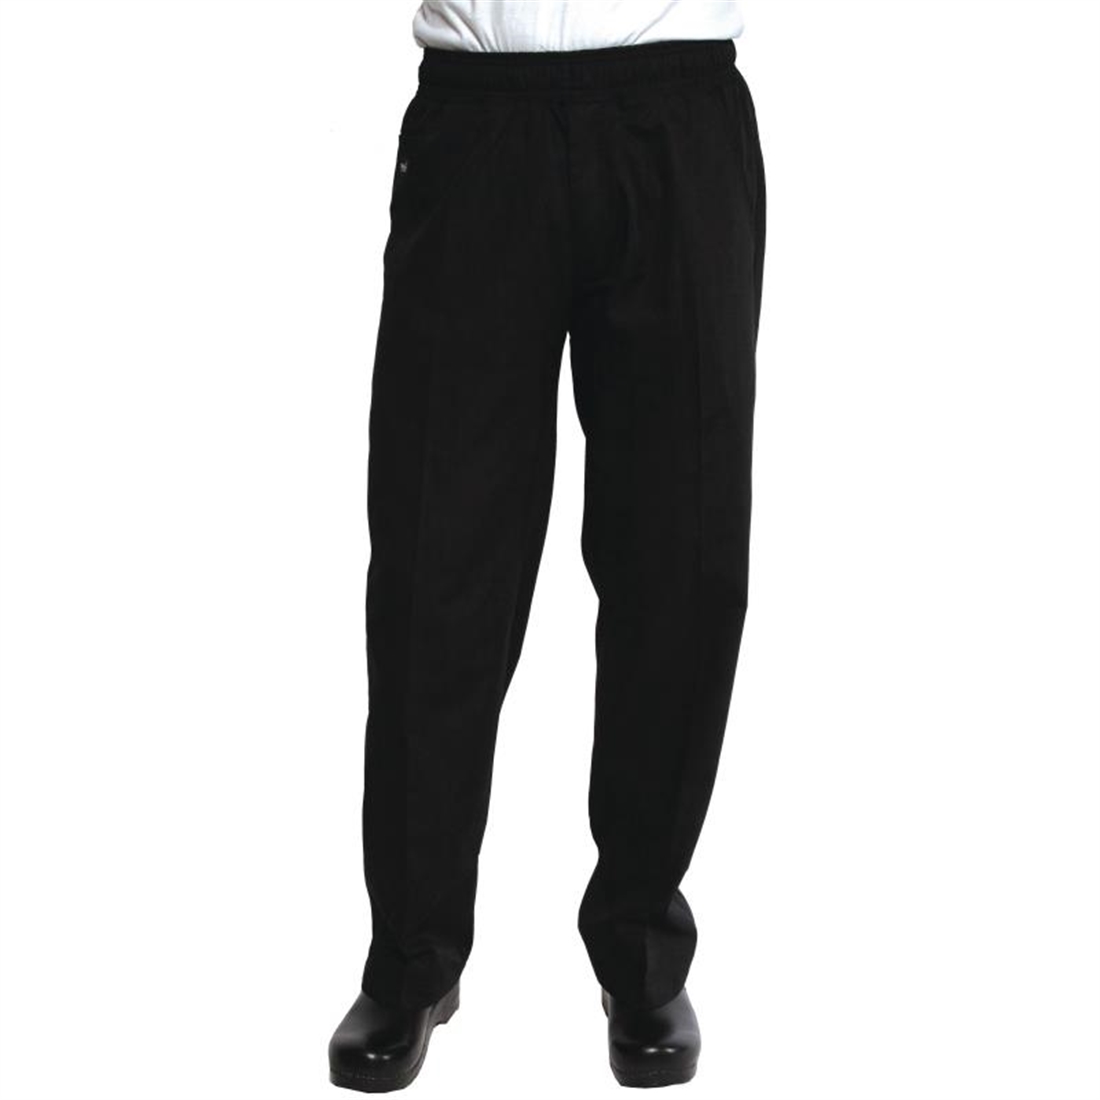 Chef Works Unisex Better Built Baggy Chefs Trousers Black S